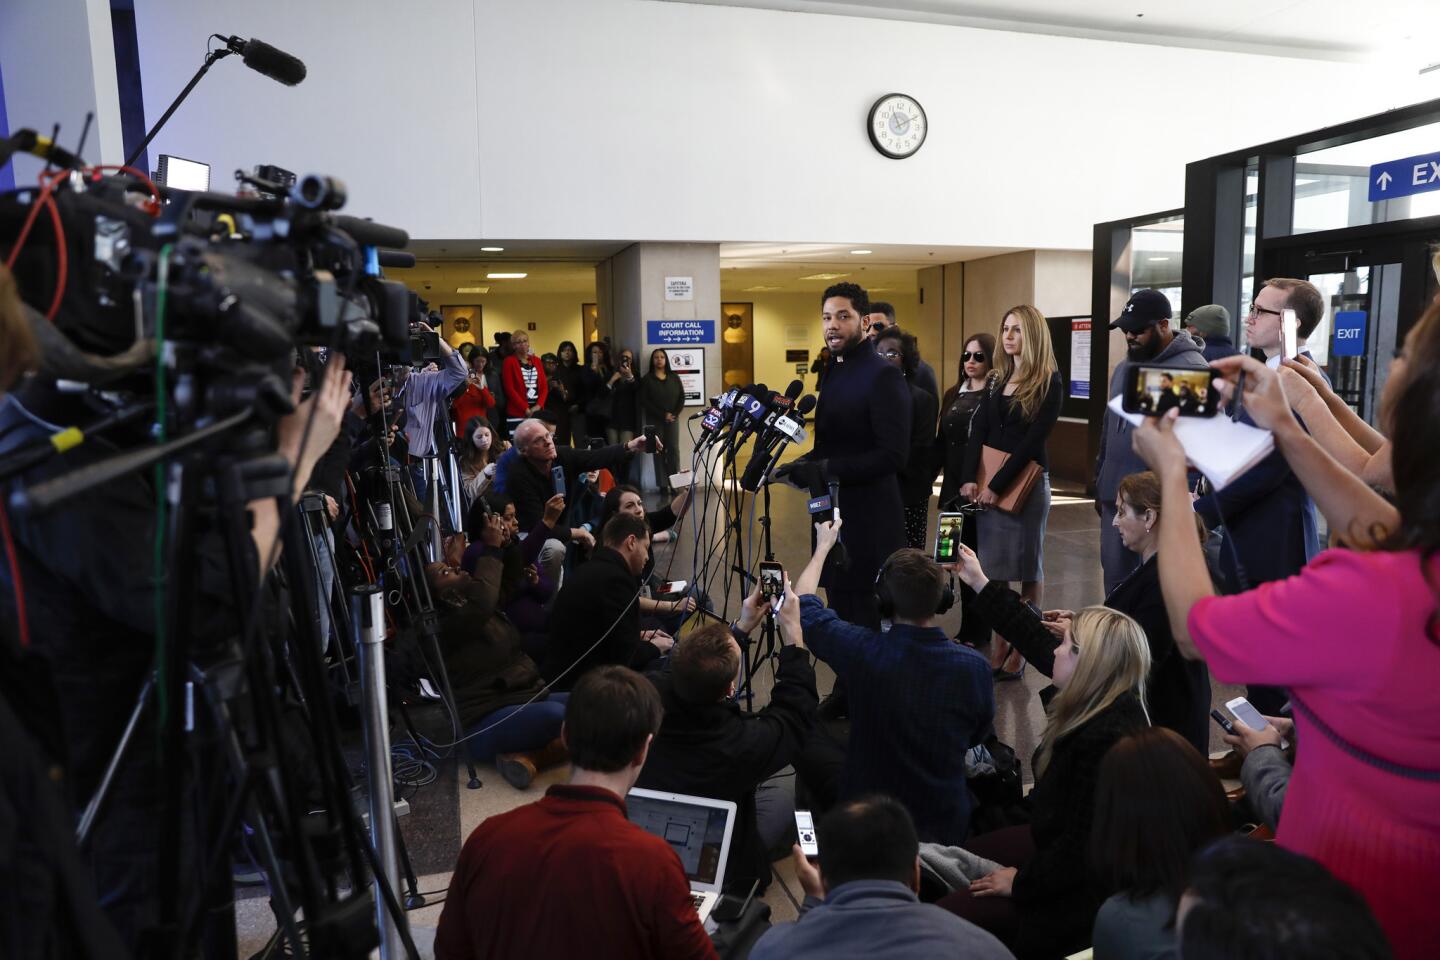 Jussie Smollett speaks to the media after all charges against him are dropped at the Leighton Criminal Court Building in Chicago on March 26, 2019.